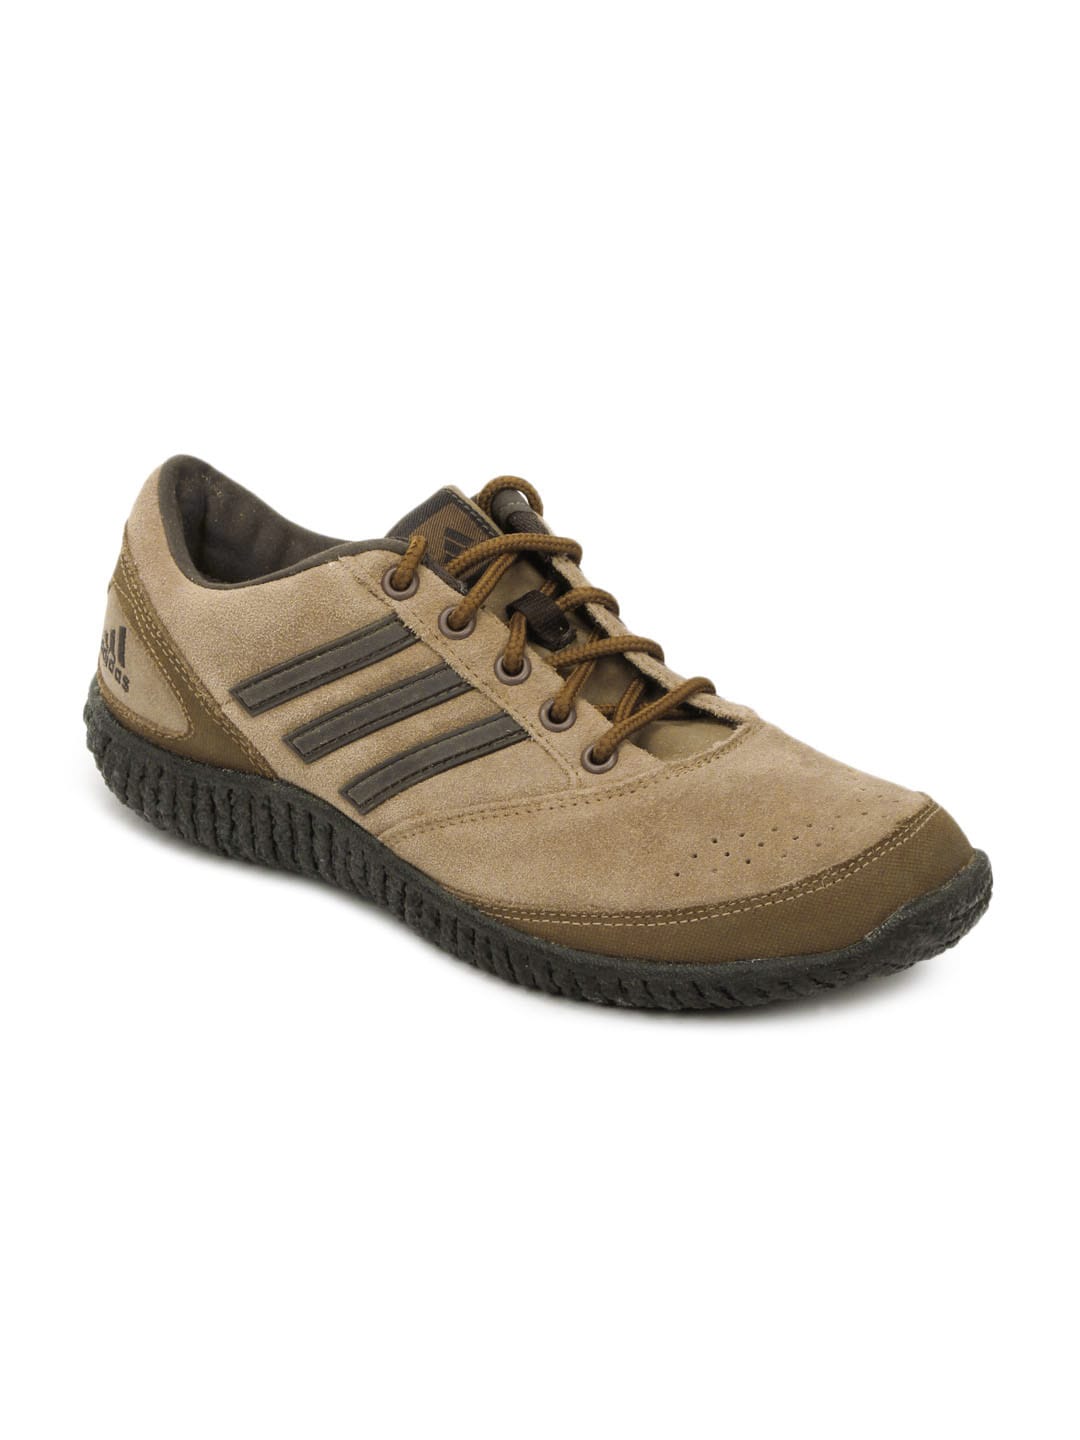 ADIDAS Men Brown Outback Shoes